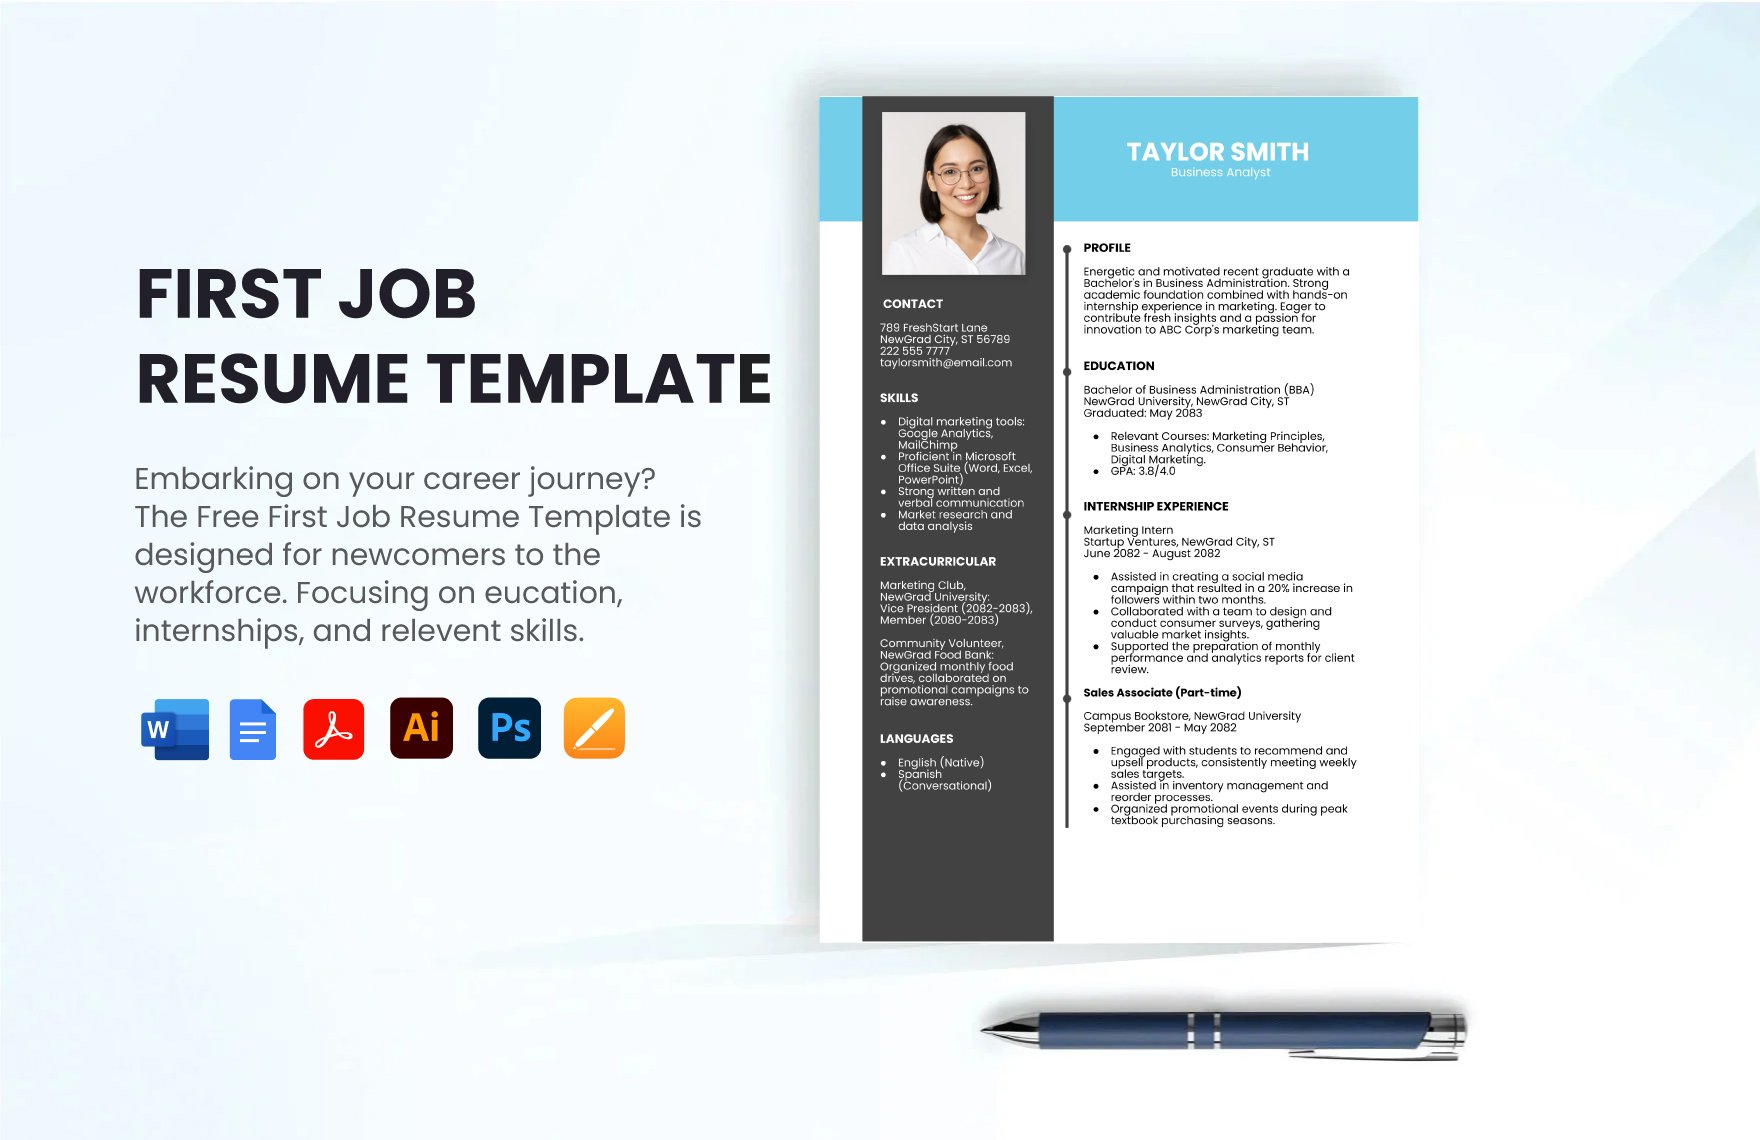 Free First Job Resume Template in Word, Google Docs, PDF, Illustrator, PSD, Apple Pages